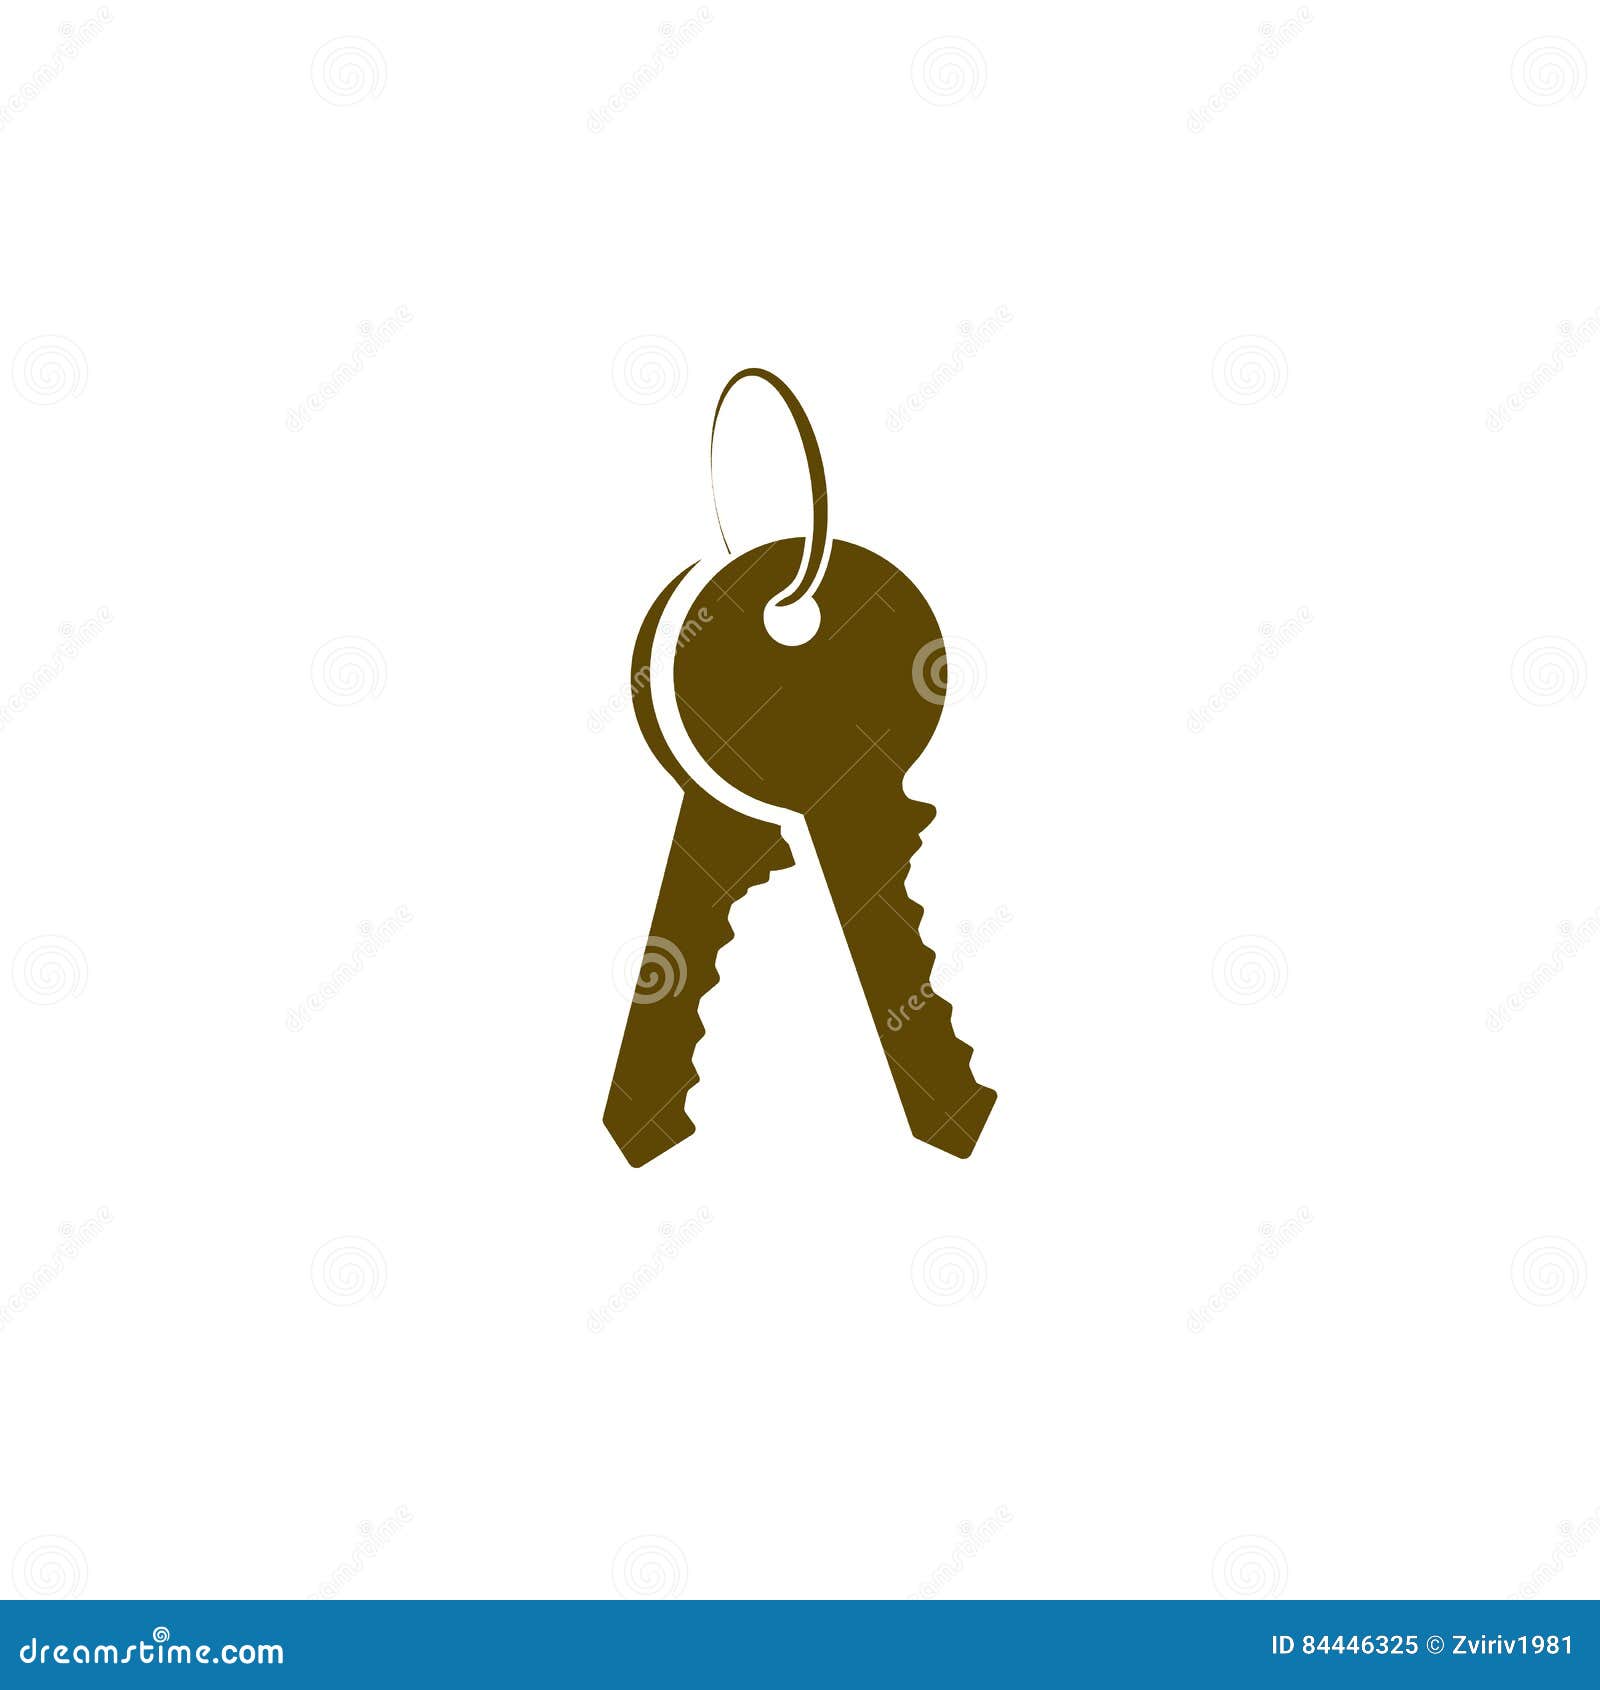 Download Flat Paper Cut Style Icon Of An Old Key Stock Illustration ...